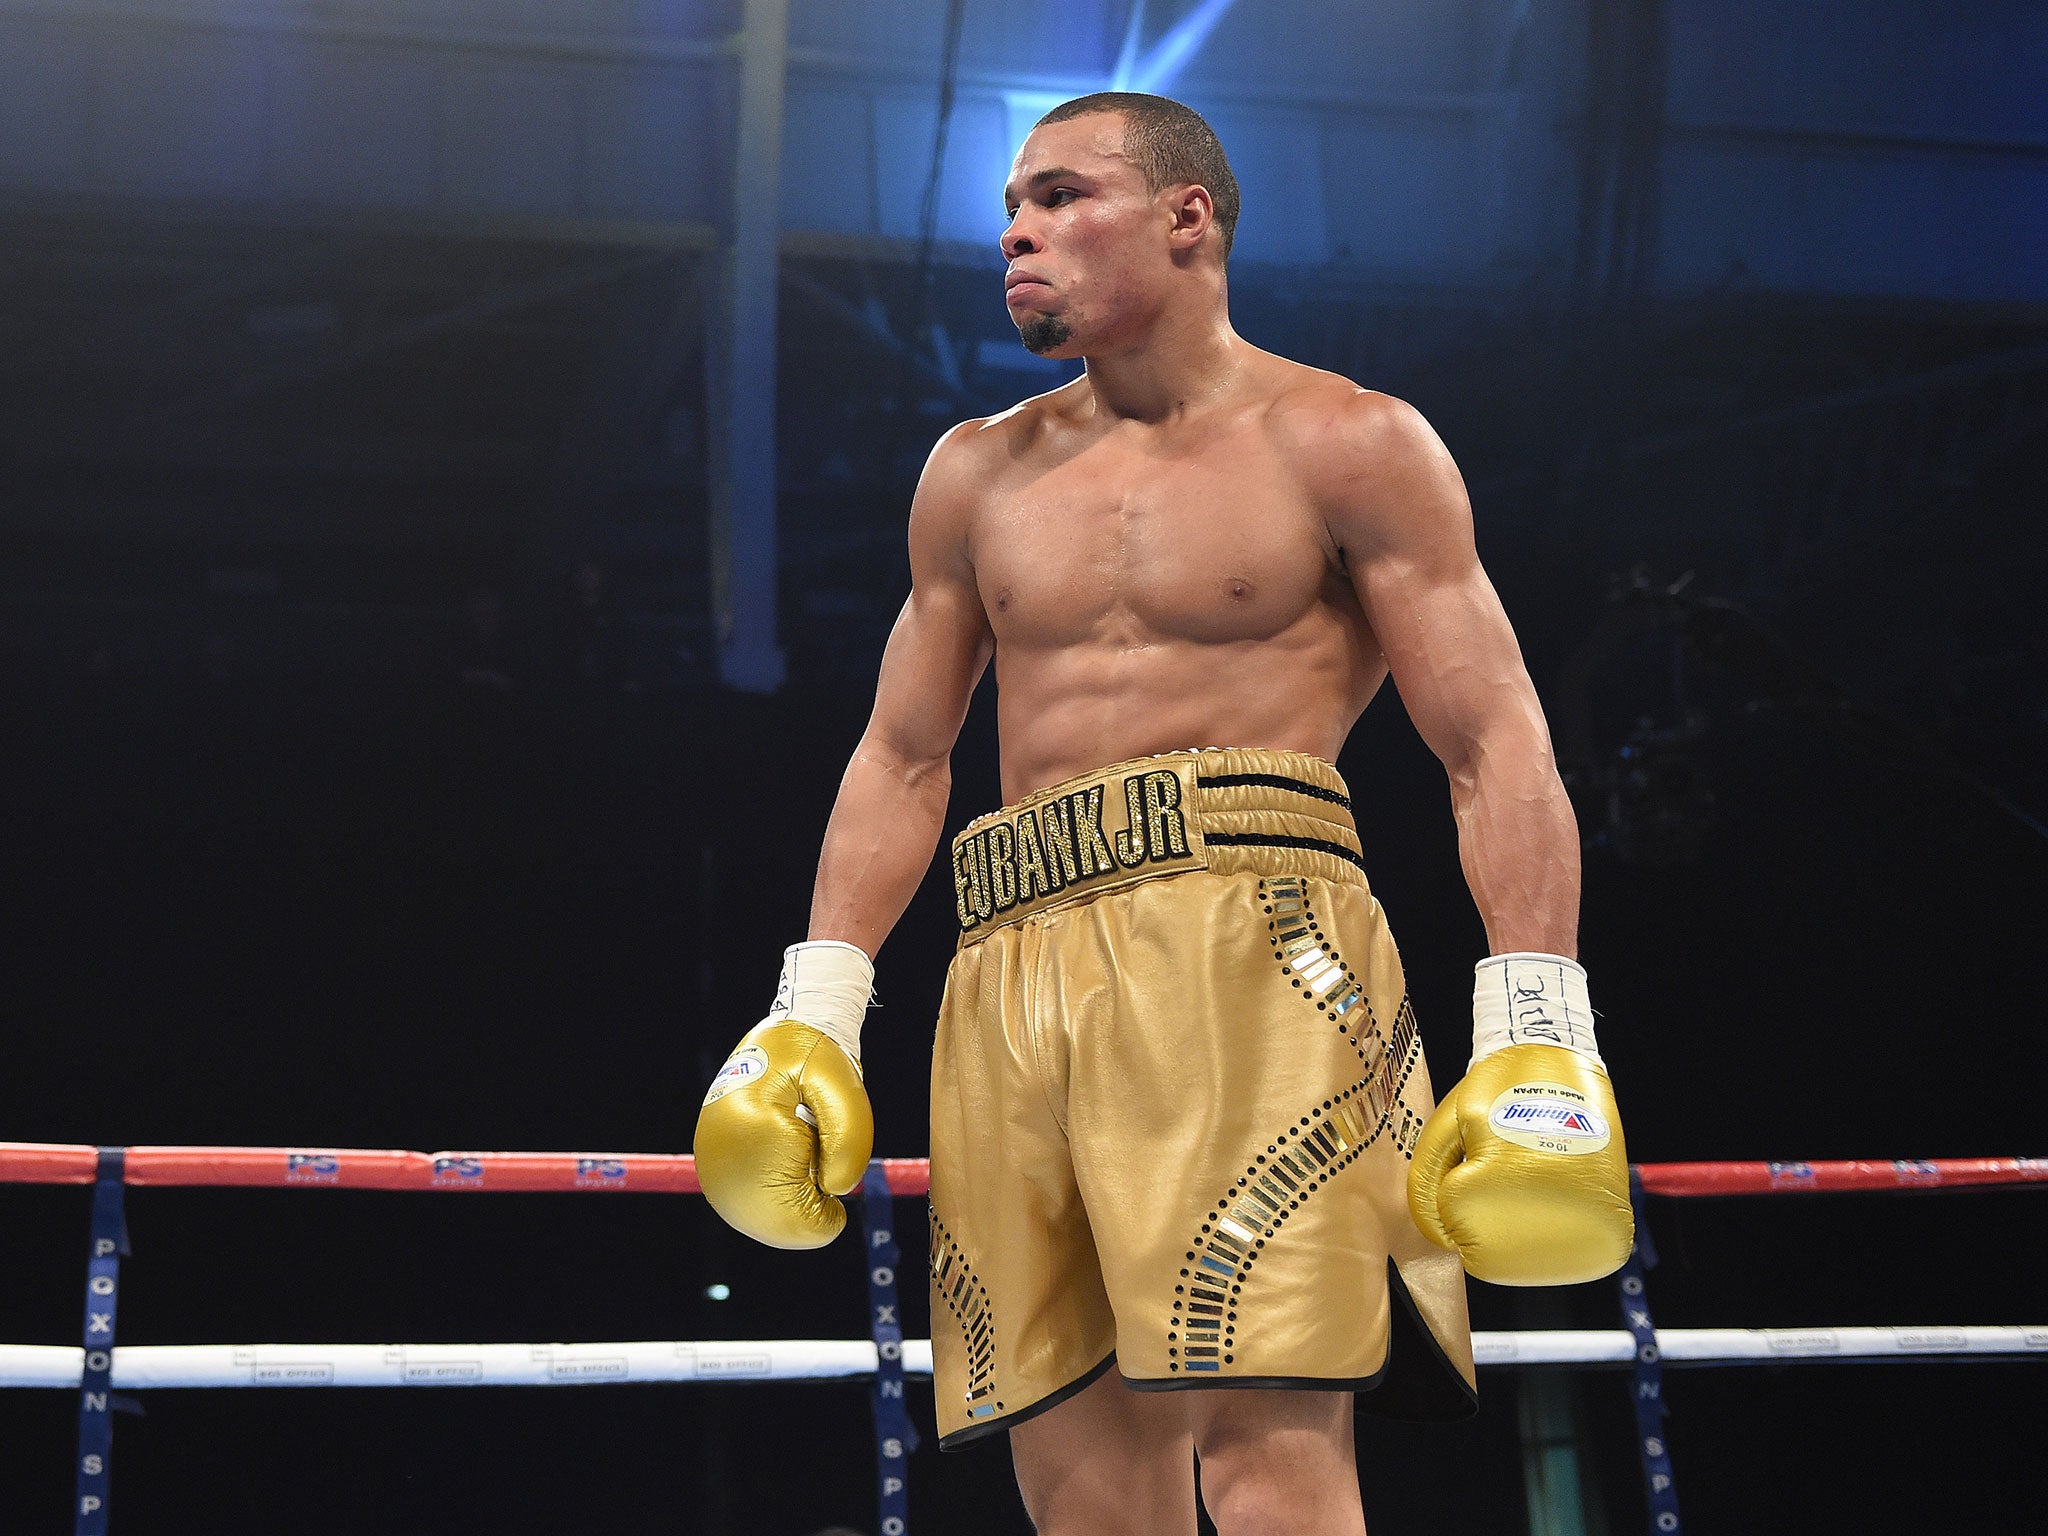 &#13; Eubank Jr has just the one defeat in 27 fights - an odd loss over 12 rounds to Billy Joe Saunders in 2014 &#13;